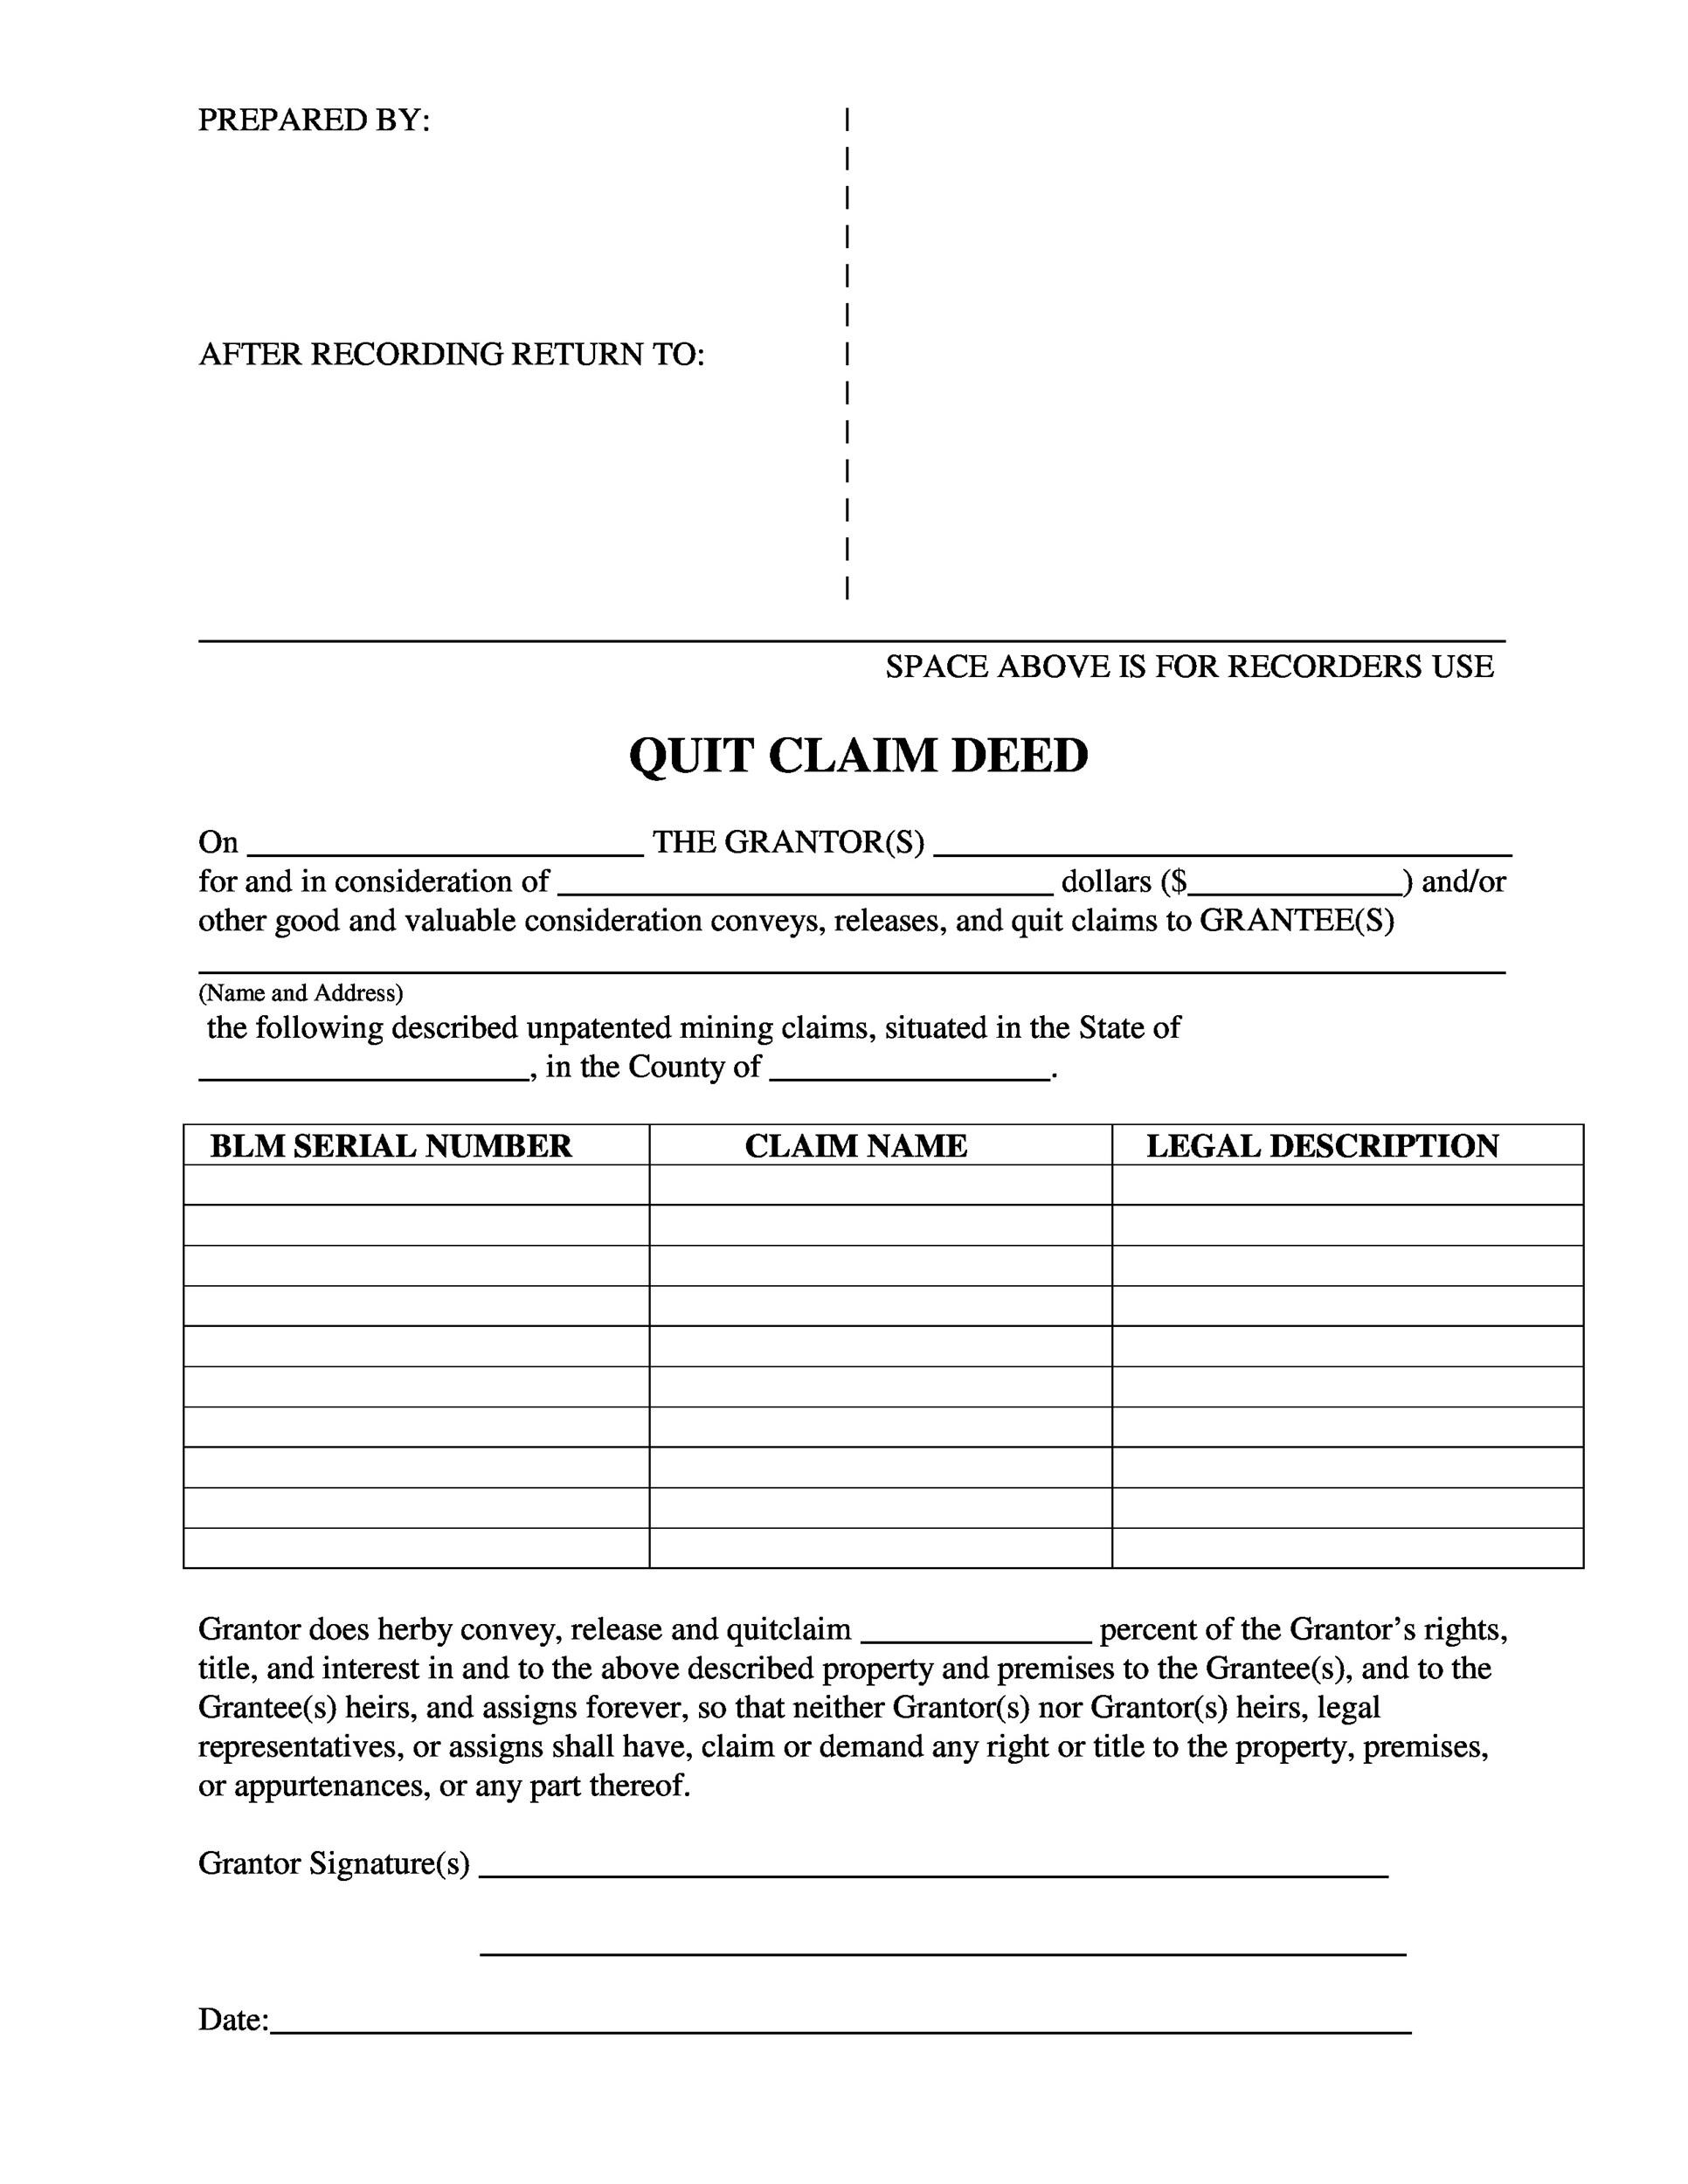 printable example of a quit claim deed completed